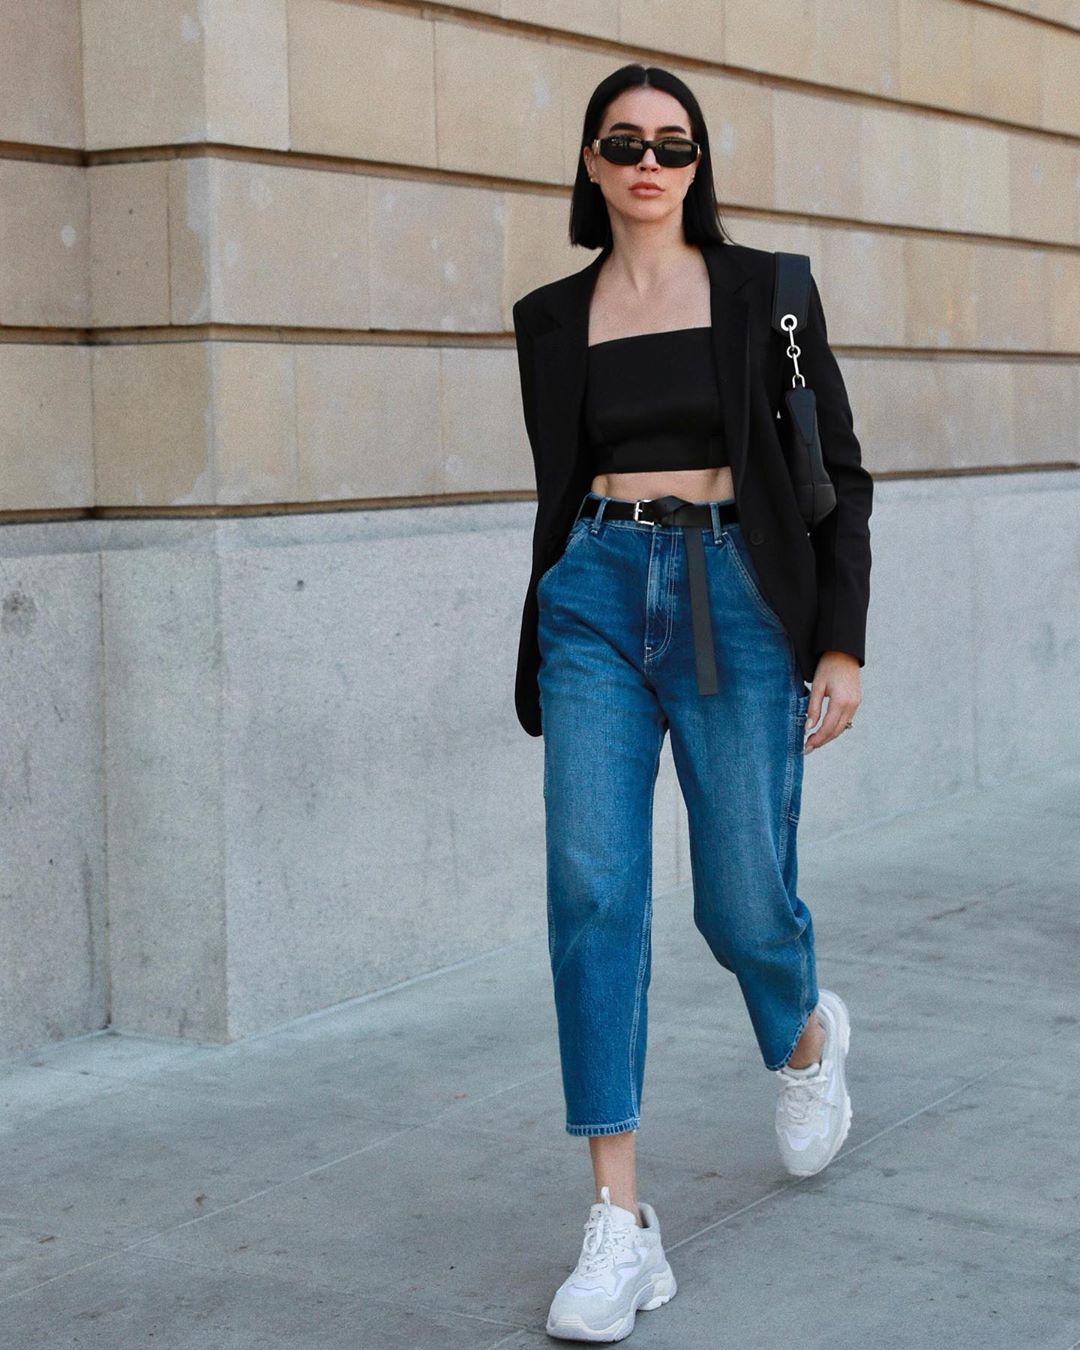 This Chic Outfit Makes an Easy Spring Uniform to Wear Anywhere